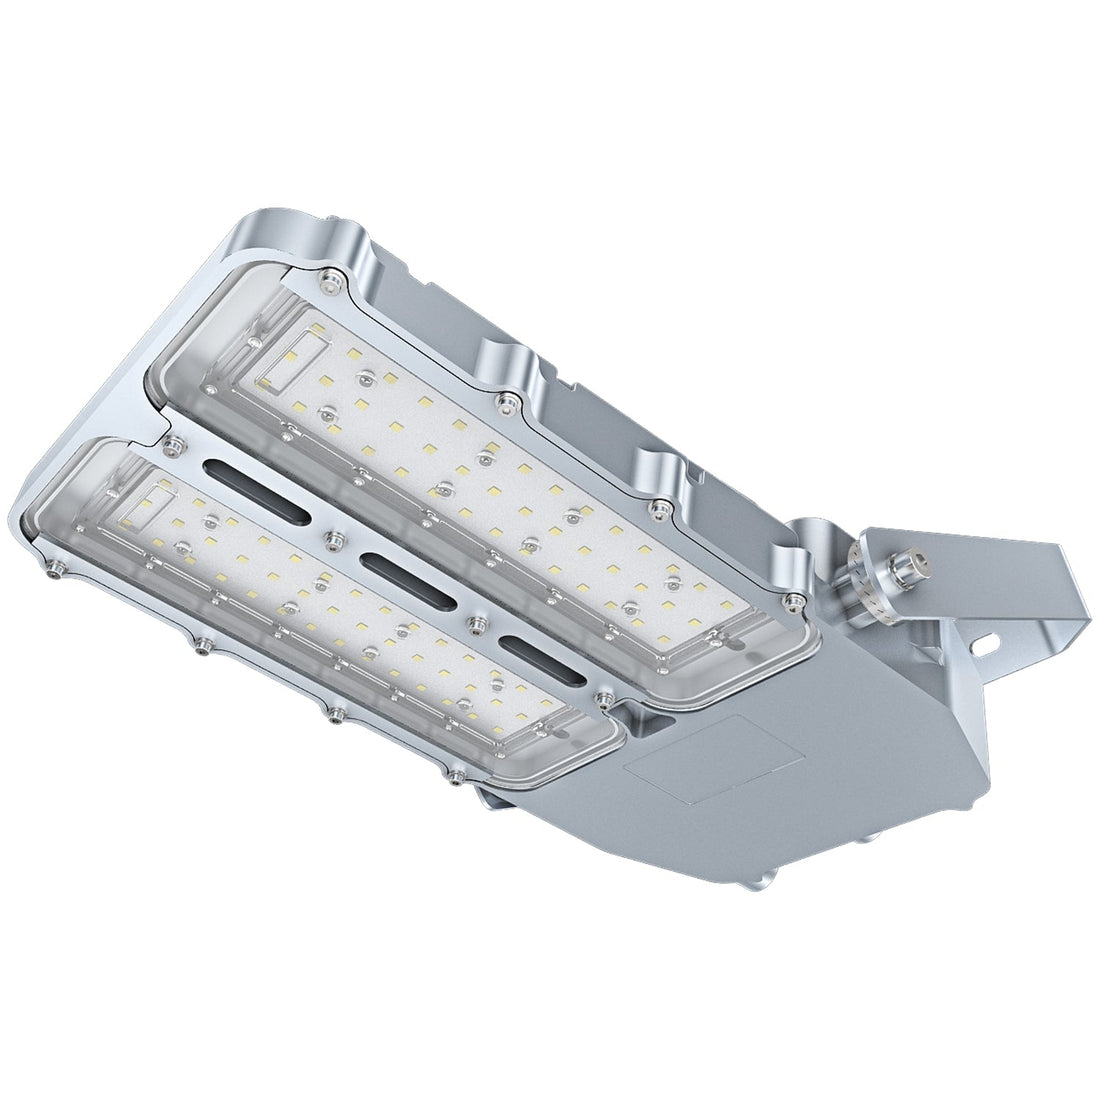 STA124 Series 200W LED Explosion Proof Area Light - 5000K Daylight, 26000LM, Dimmable, IP66 Rated, Hazardous Location Lighting Fixtures